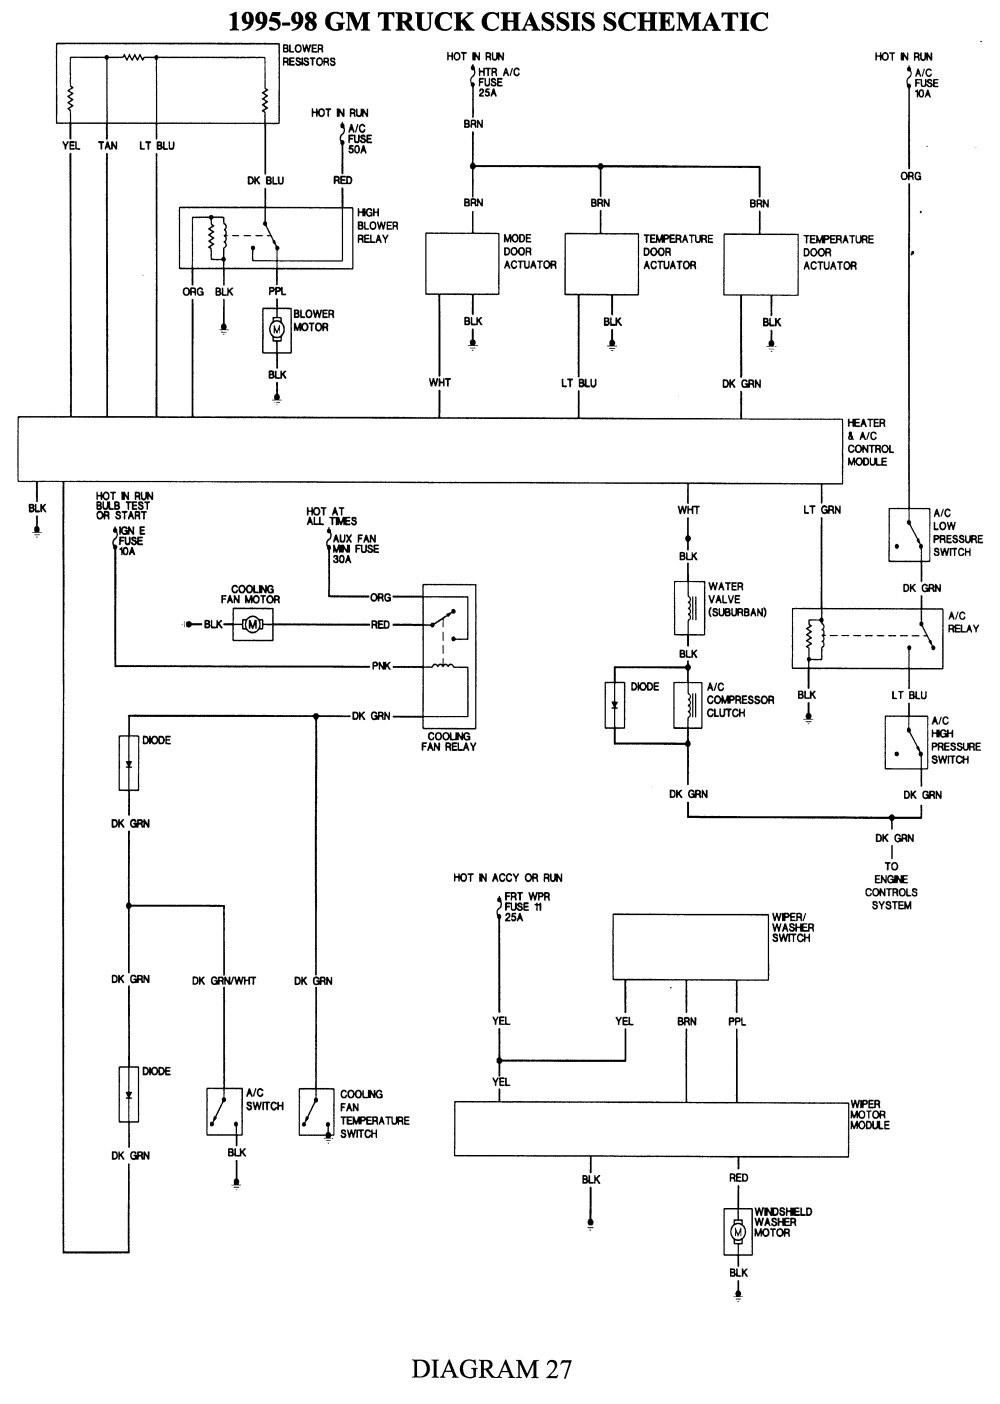 wiring schematic heater blower motor for 98 chevy tahoe Google Search